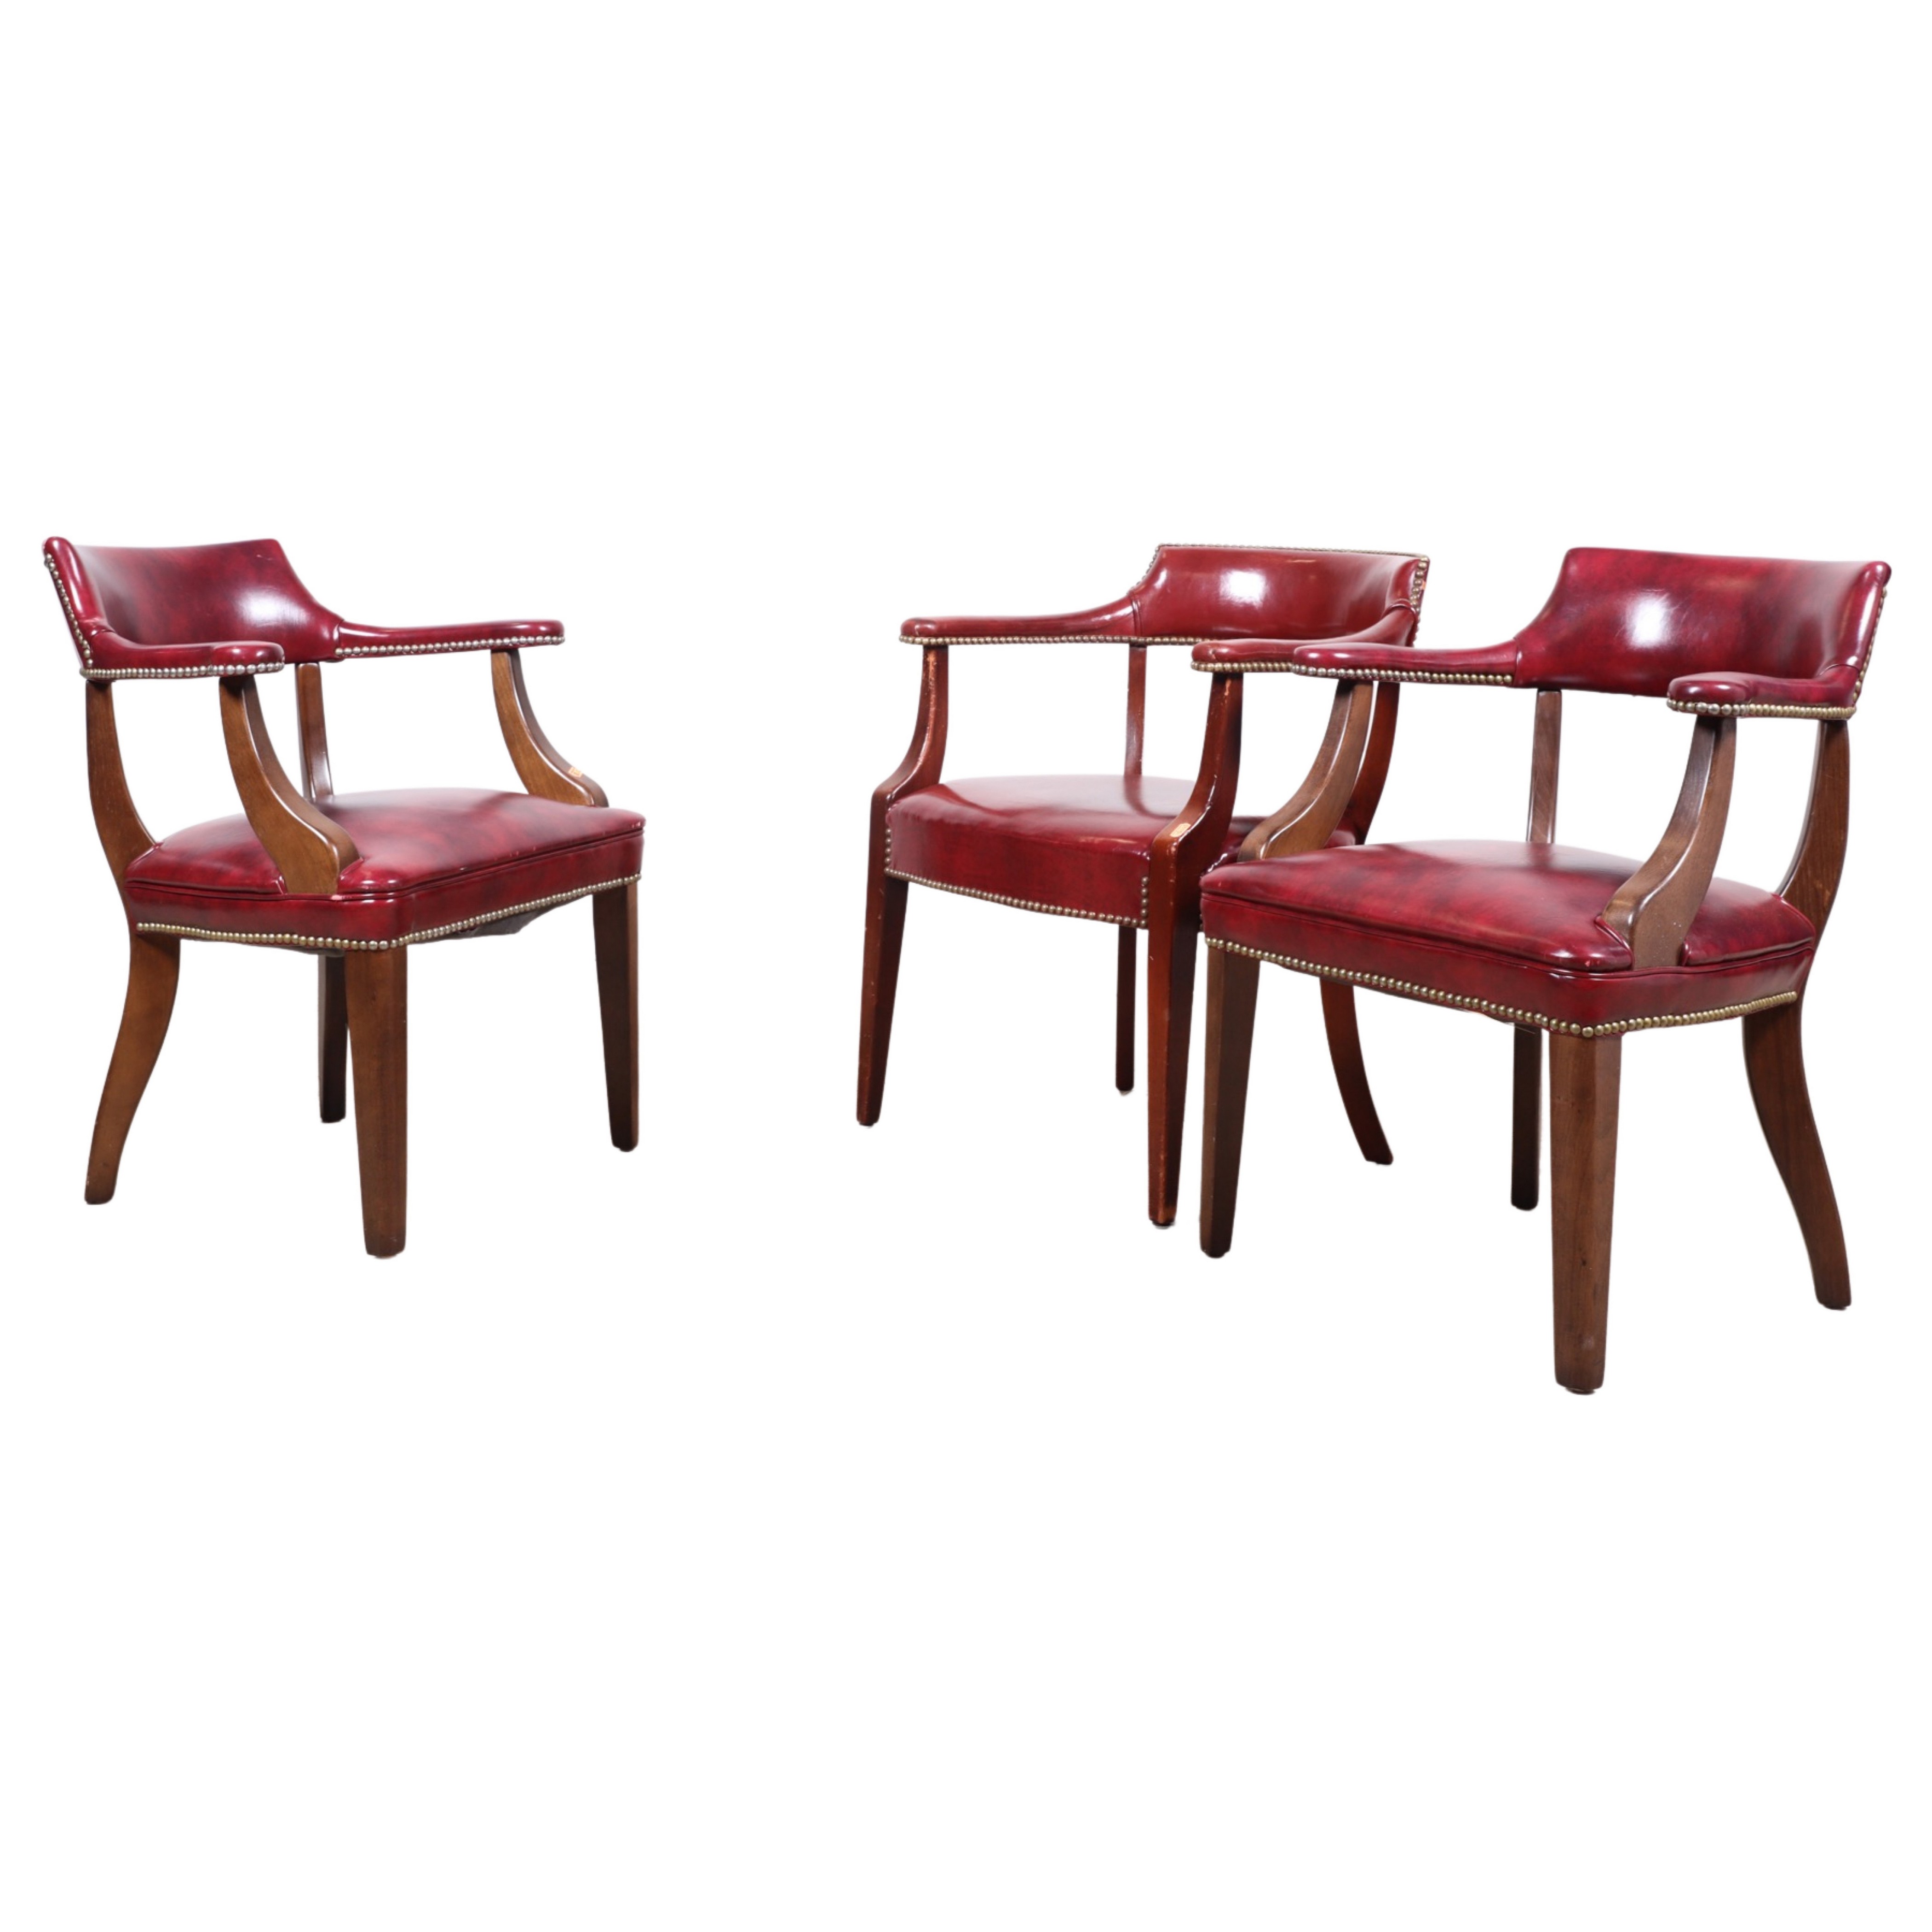 (3) leather office chairs, red